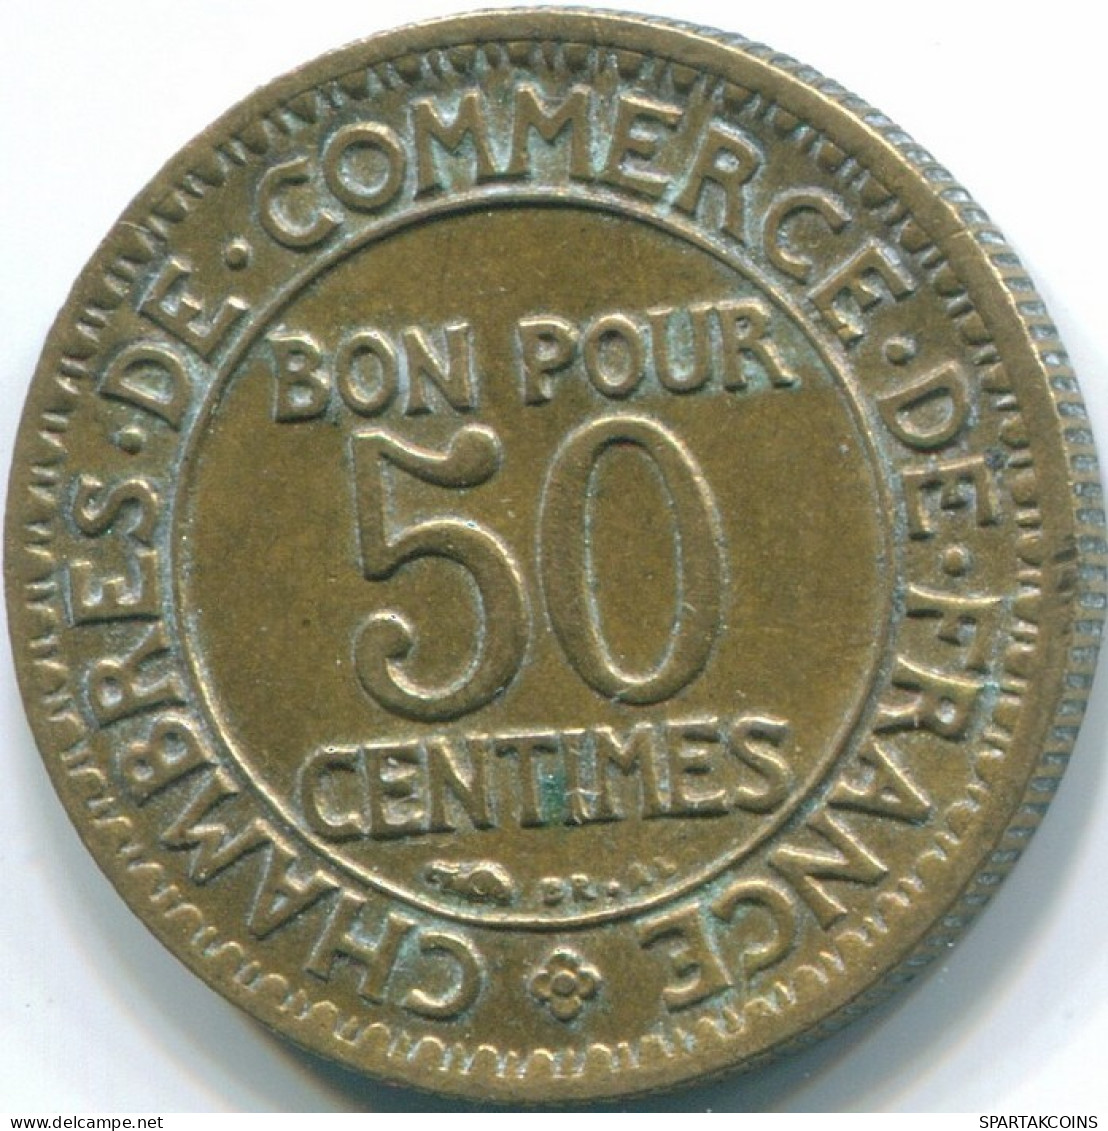 50 CENTIMES 1922 FRANCE Pièce COMMERCE CHAMBER XF #FR1191.6.F.A - 50 Centimes